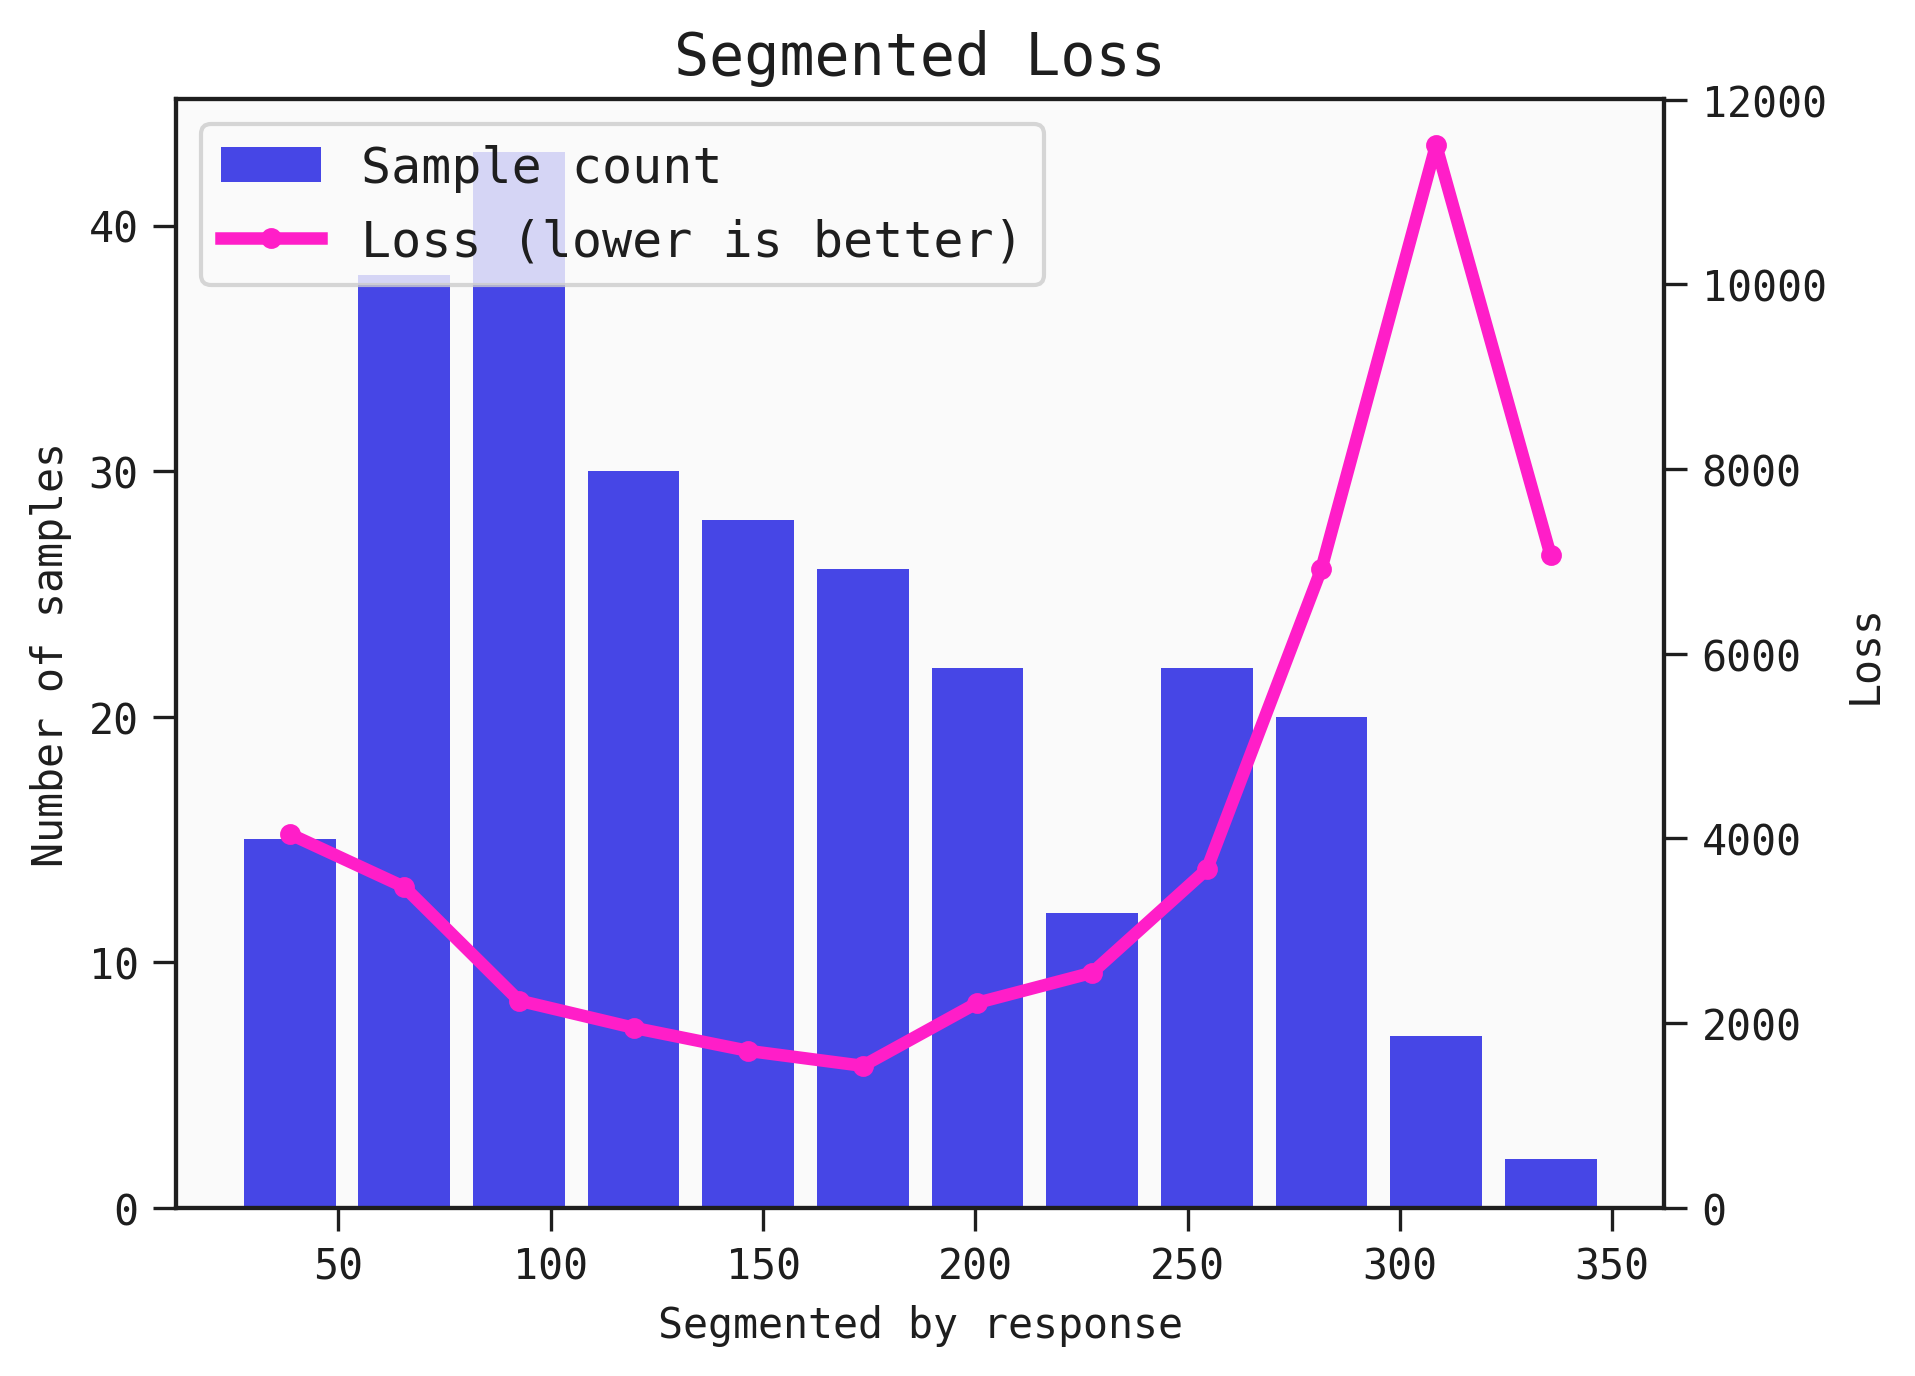 Segmented loss plot with custom legend, showing the distribution of the input values overlayed with the average loss.